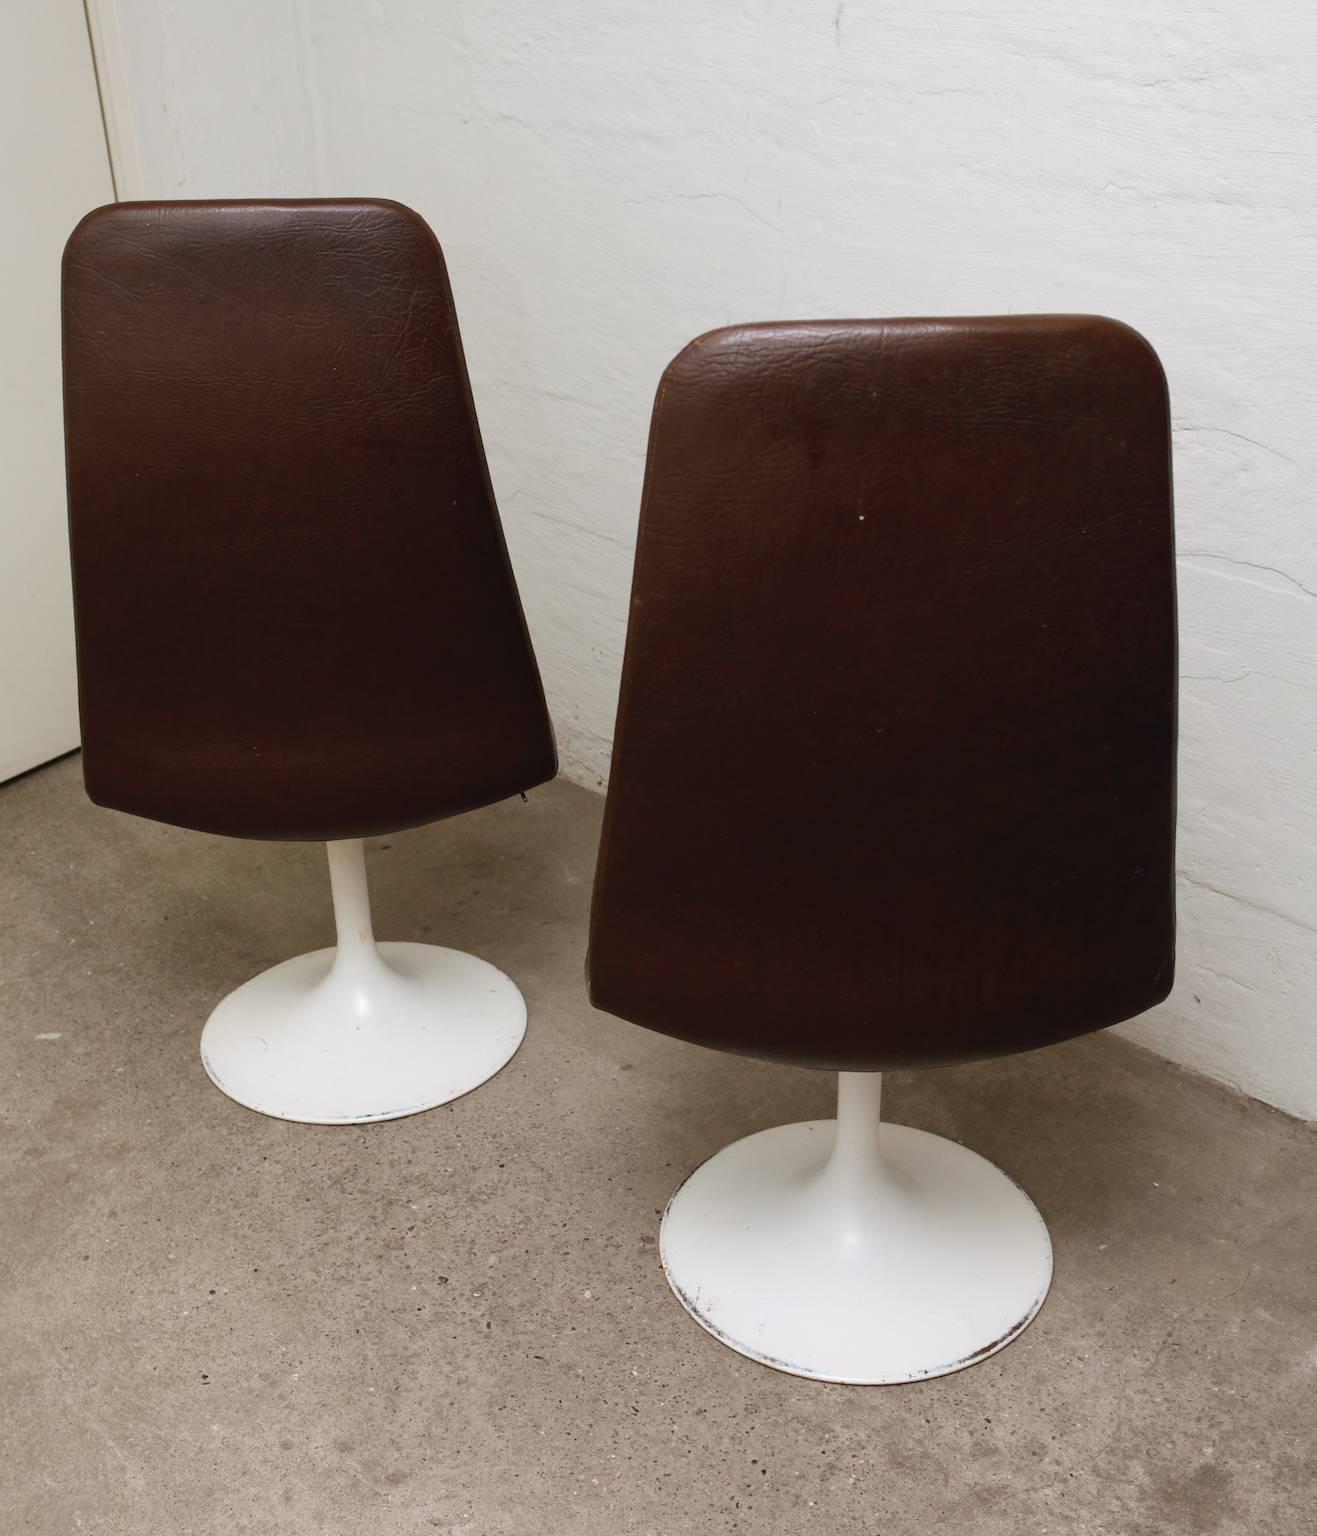 Two Chairs with Matching Table and Tulip foot by Johanson Design, Sweden, 1970s For Sale 1